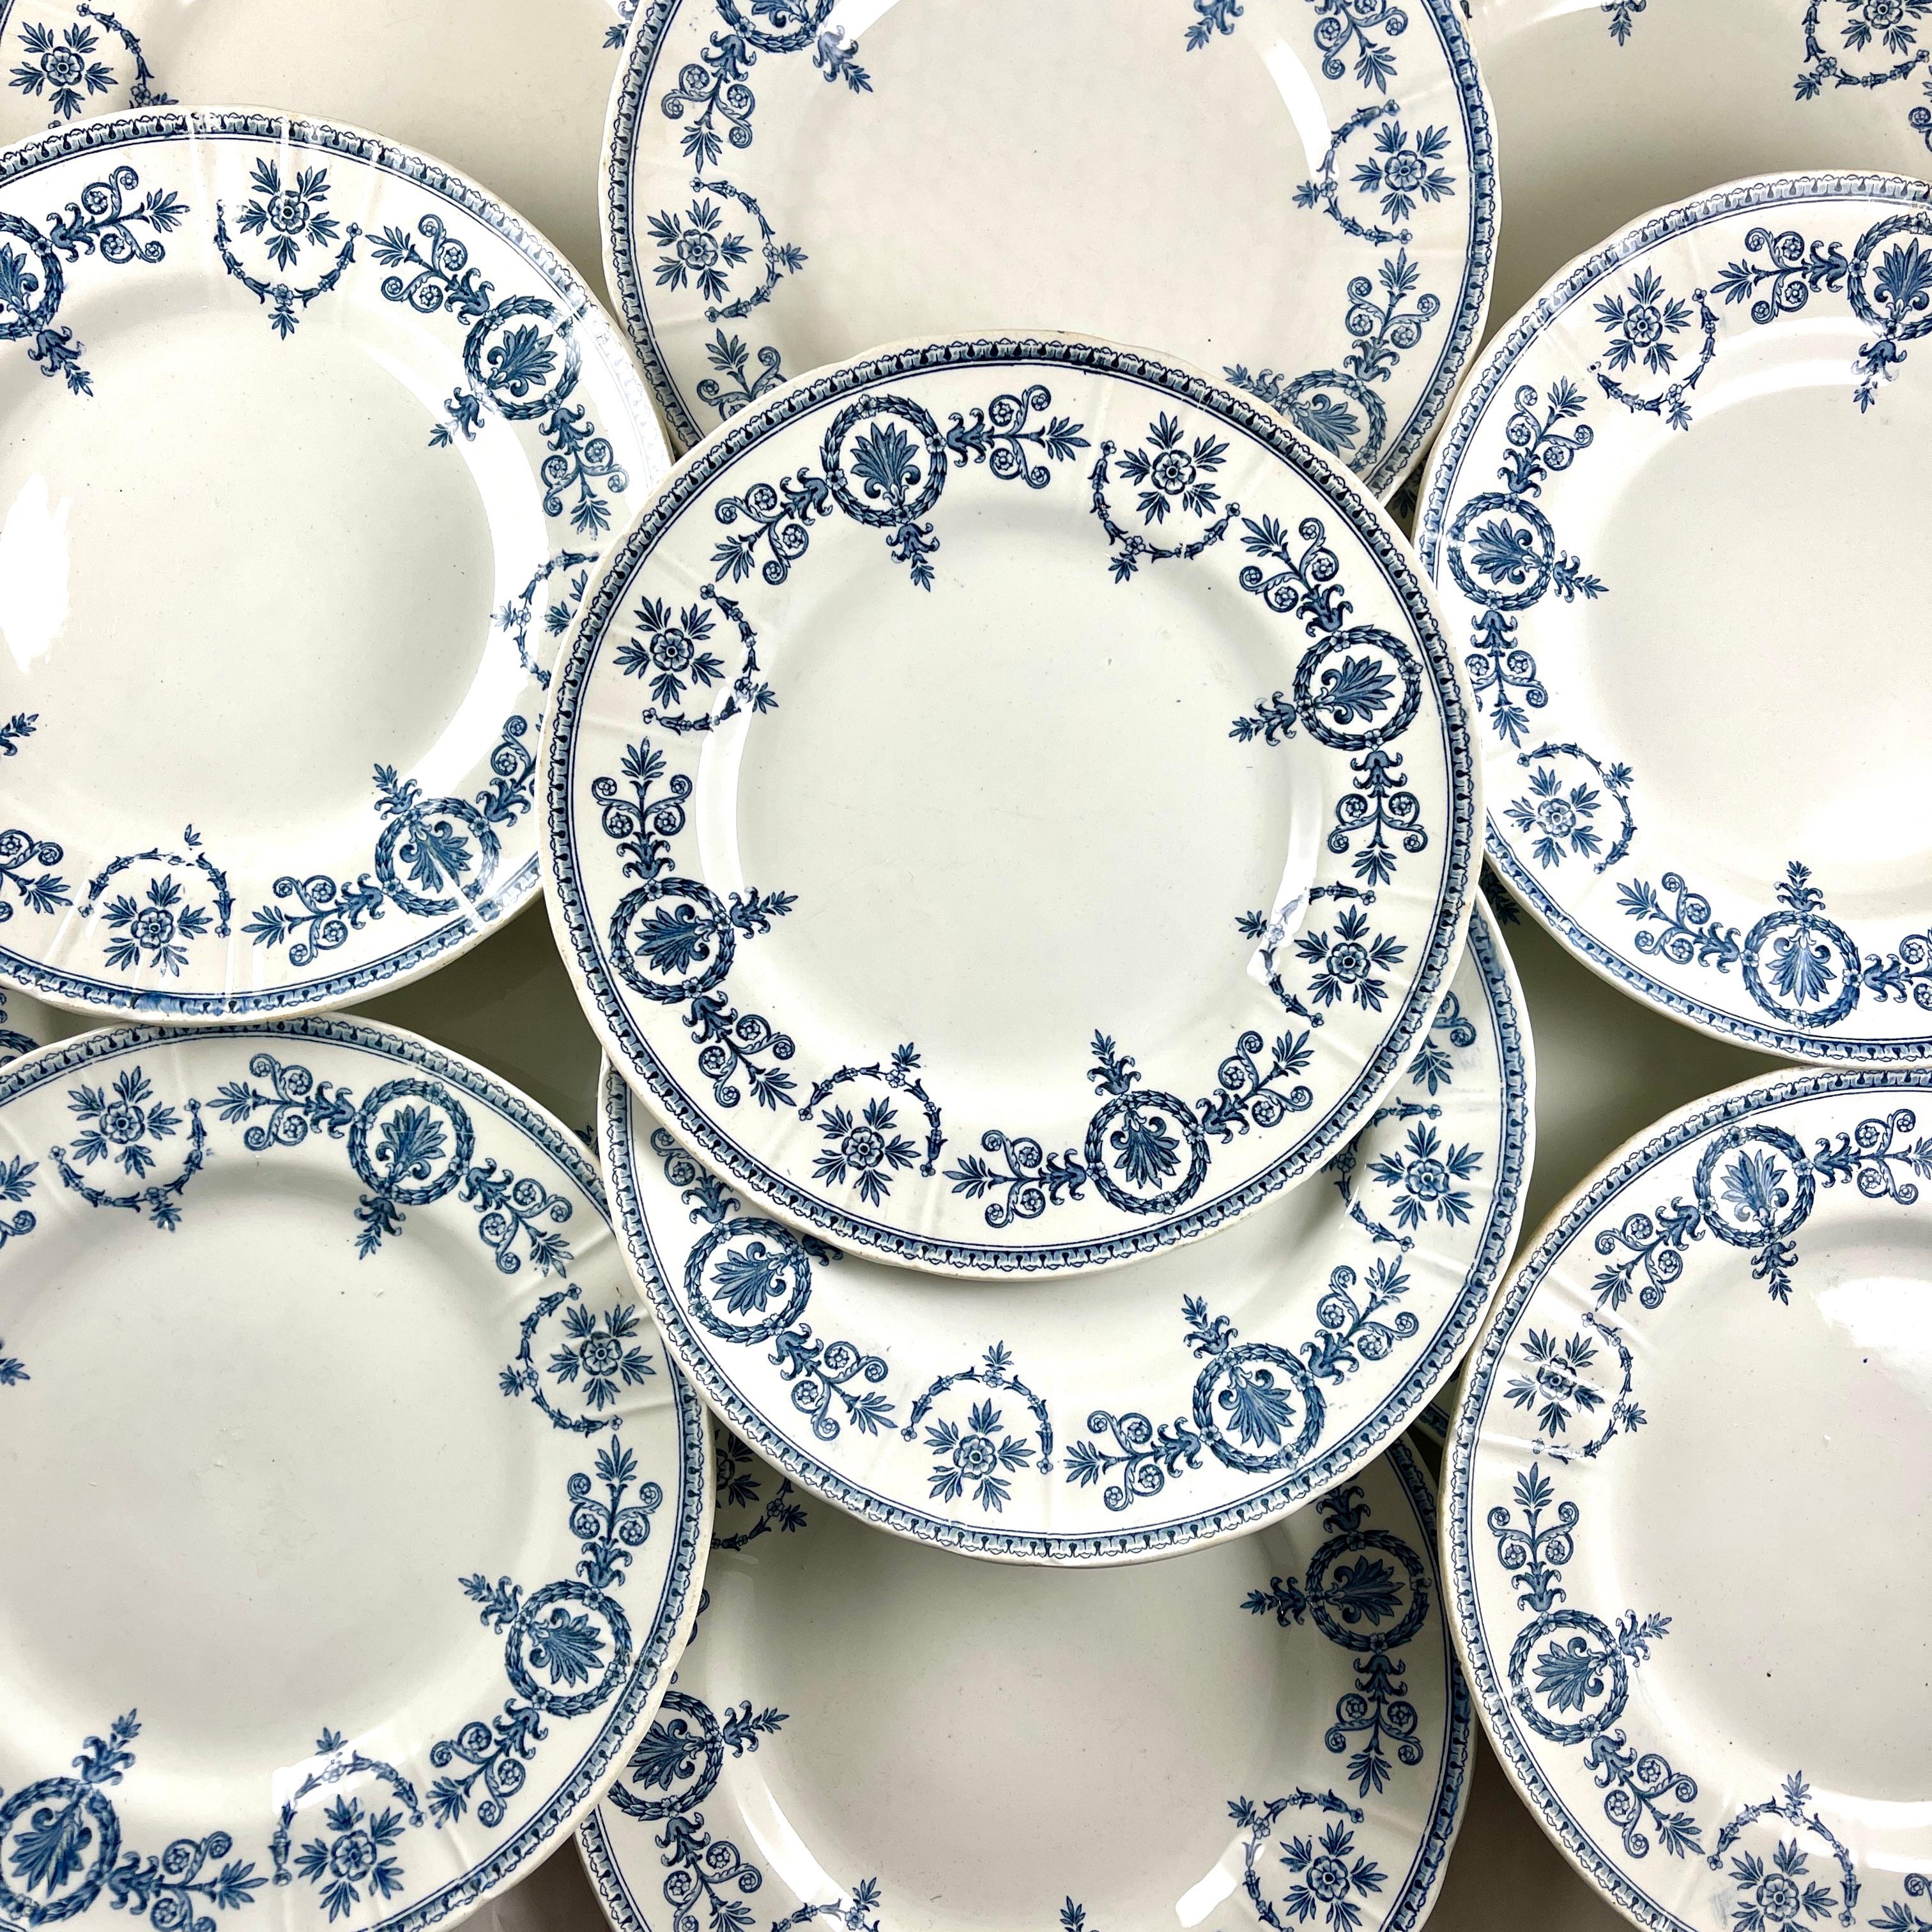 From the faïencery Gien, French ironstone dinner plates in the Malmaison pattern, circa 1871-1875.

Transfer printed in blue on a white ironstone body, the pattern shows a wide cartouche and floral repeating border with a running border on the